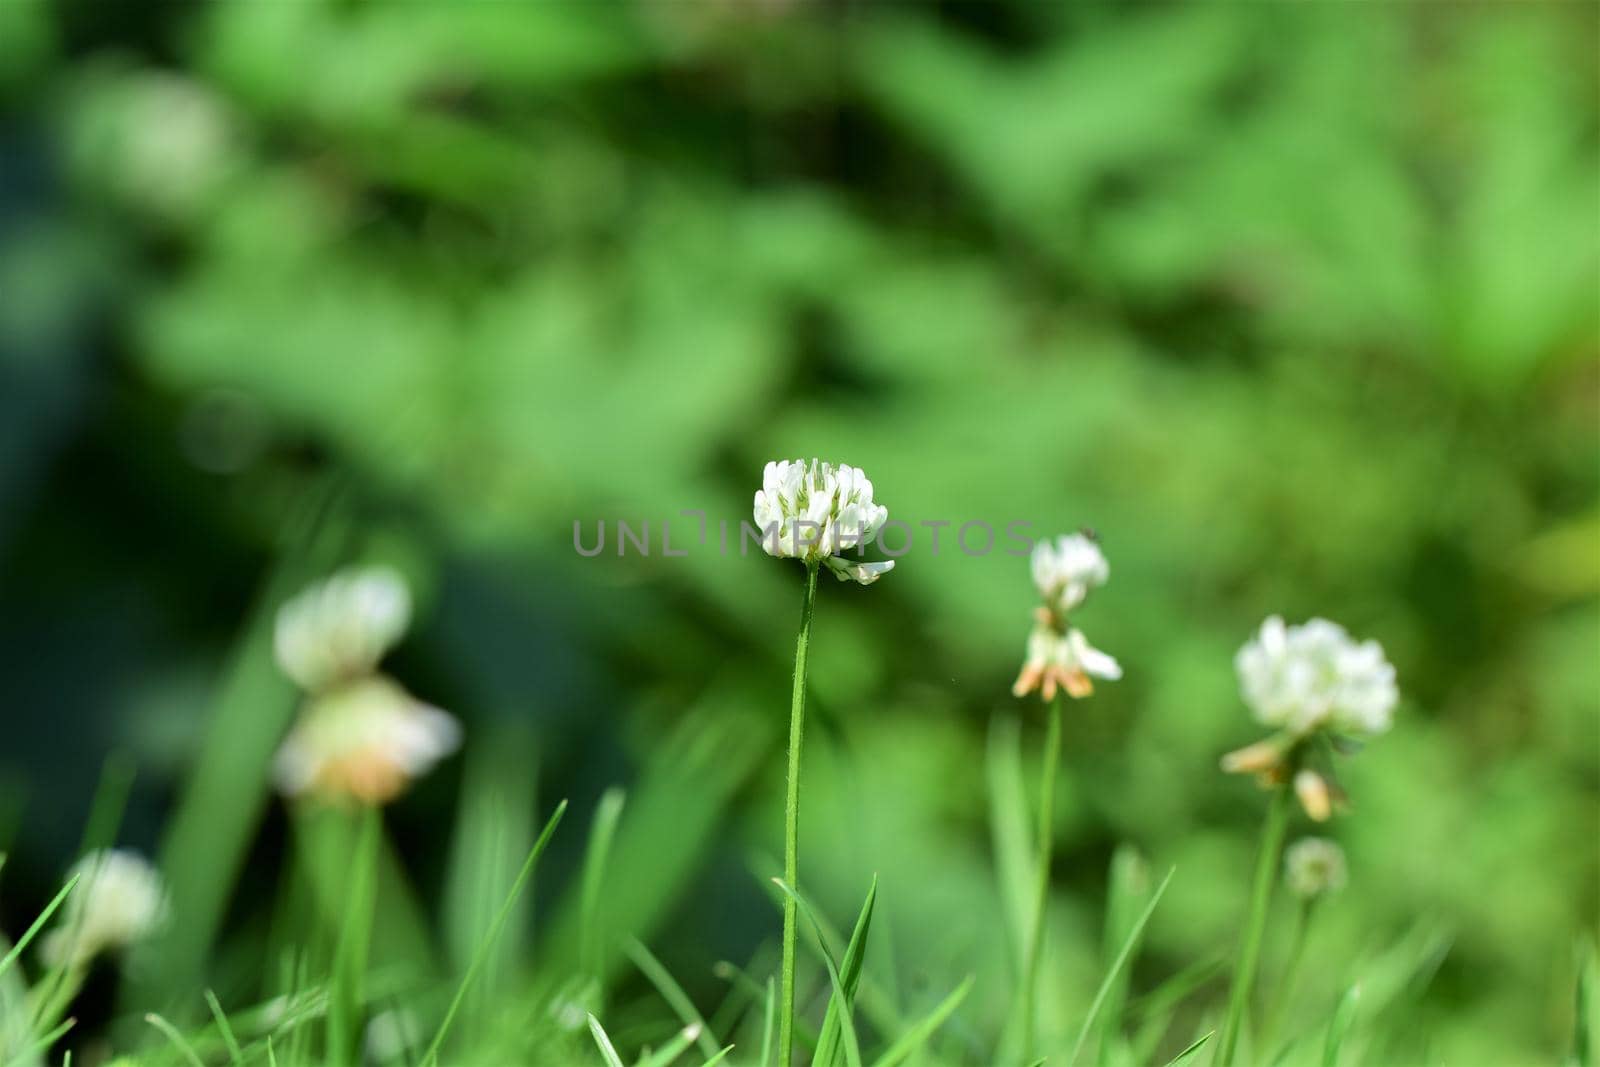 White clover blossoms against a green blurred background by Luise123